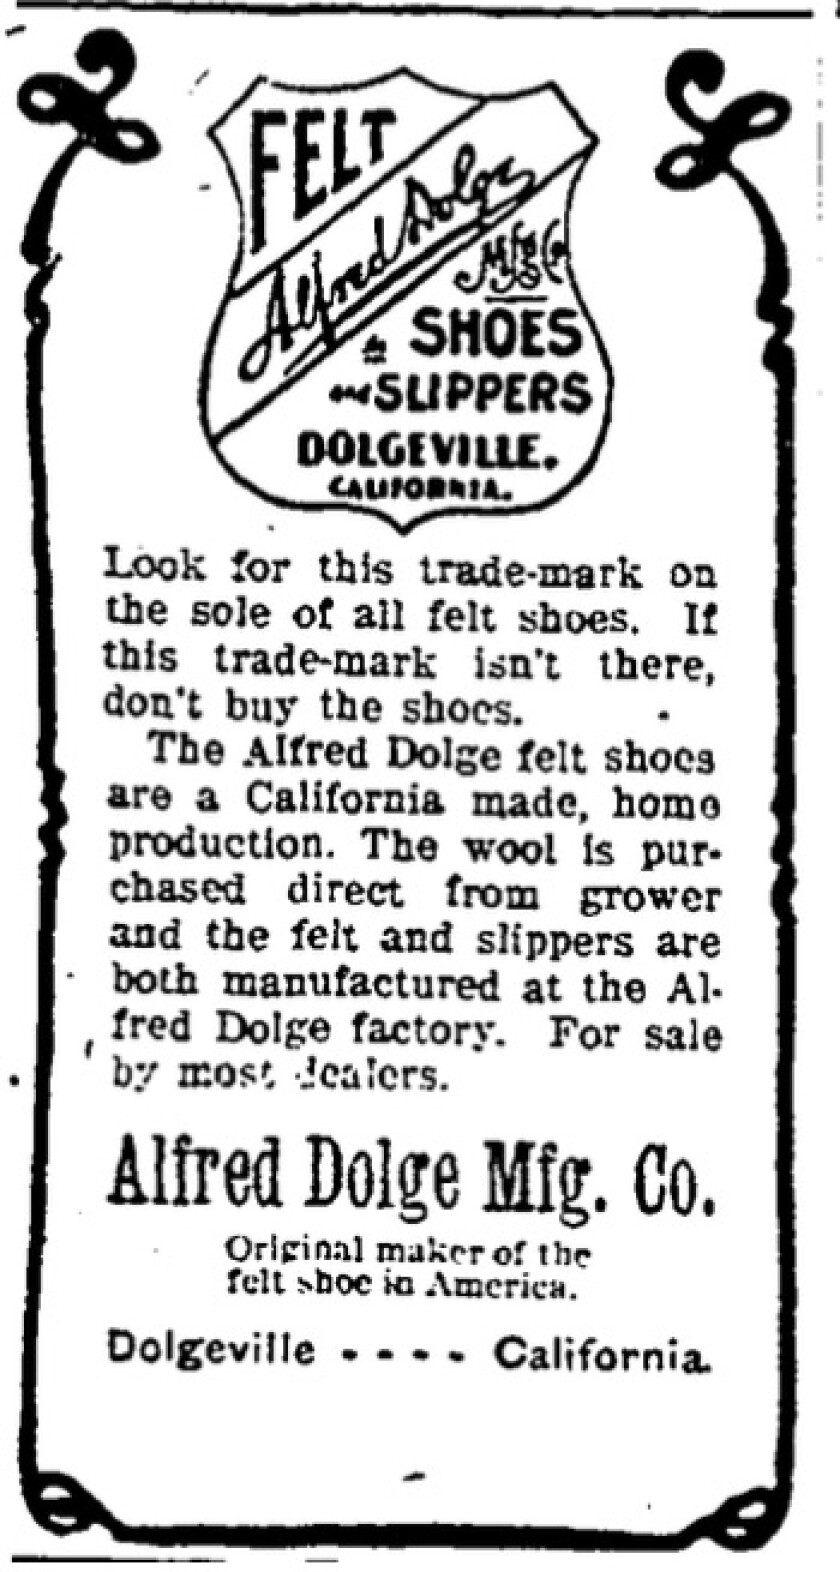 An ad for Dolge says it's the "original maker of the felt shoe in America."